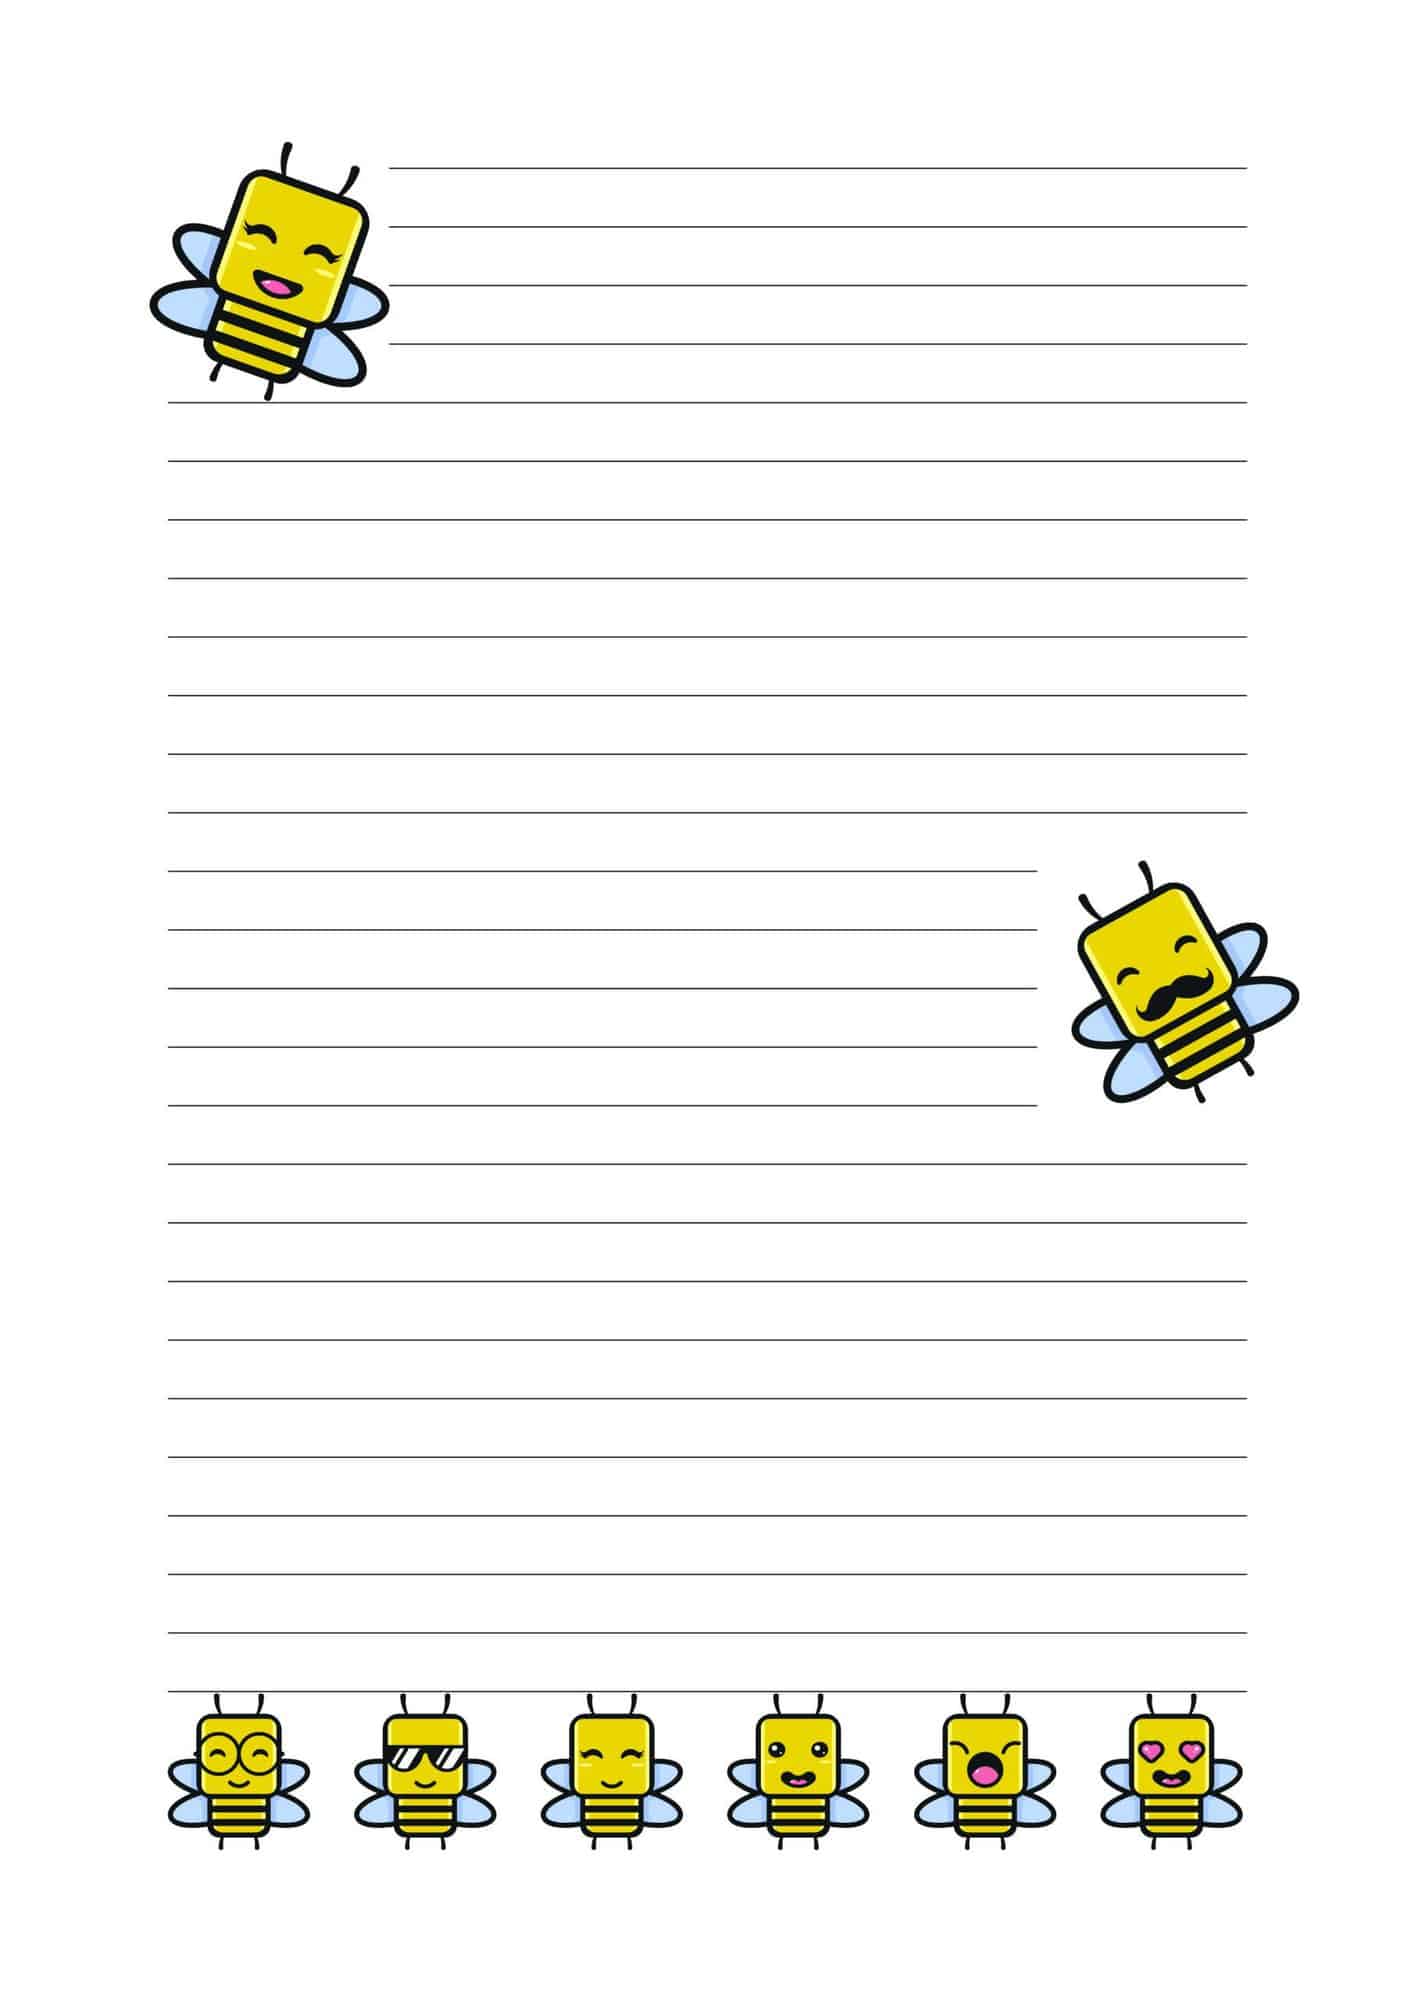 Line paper template with animated bees.